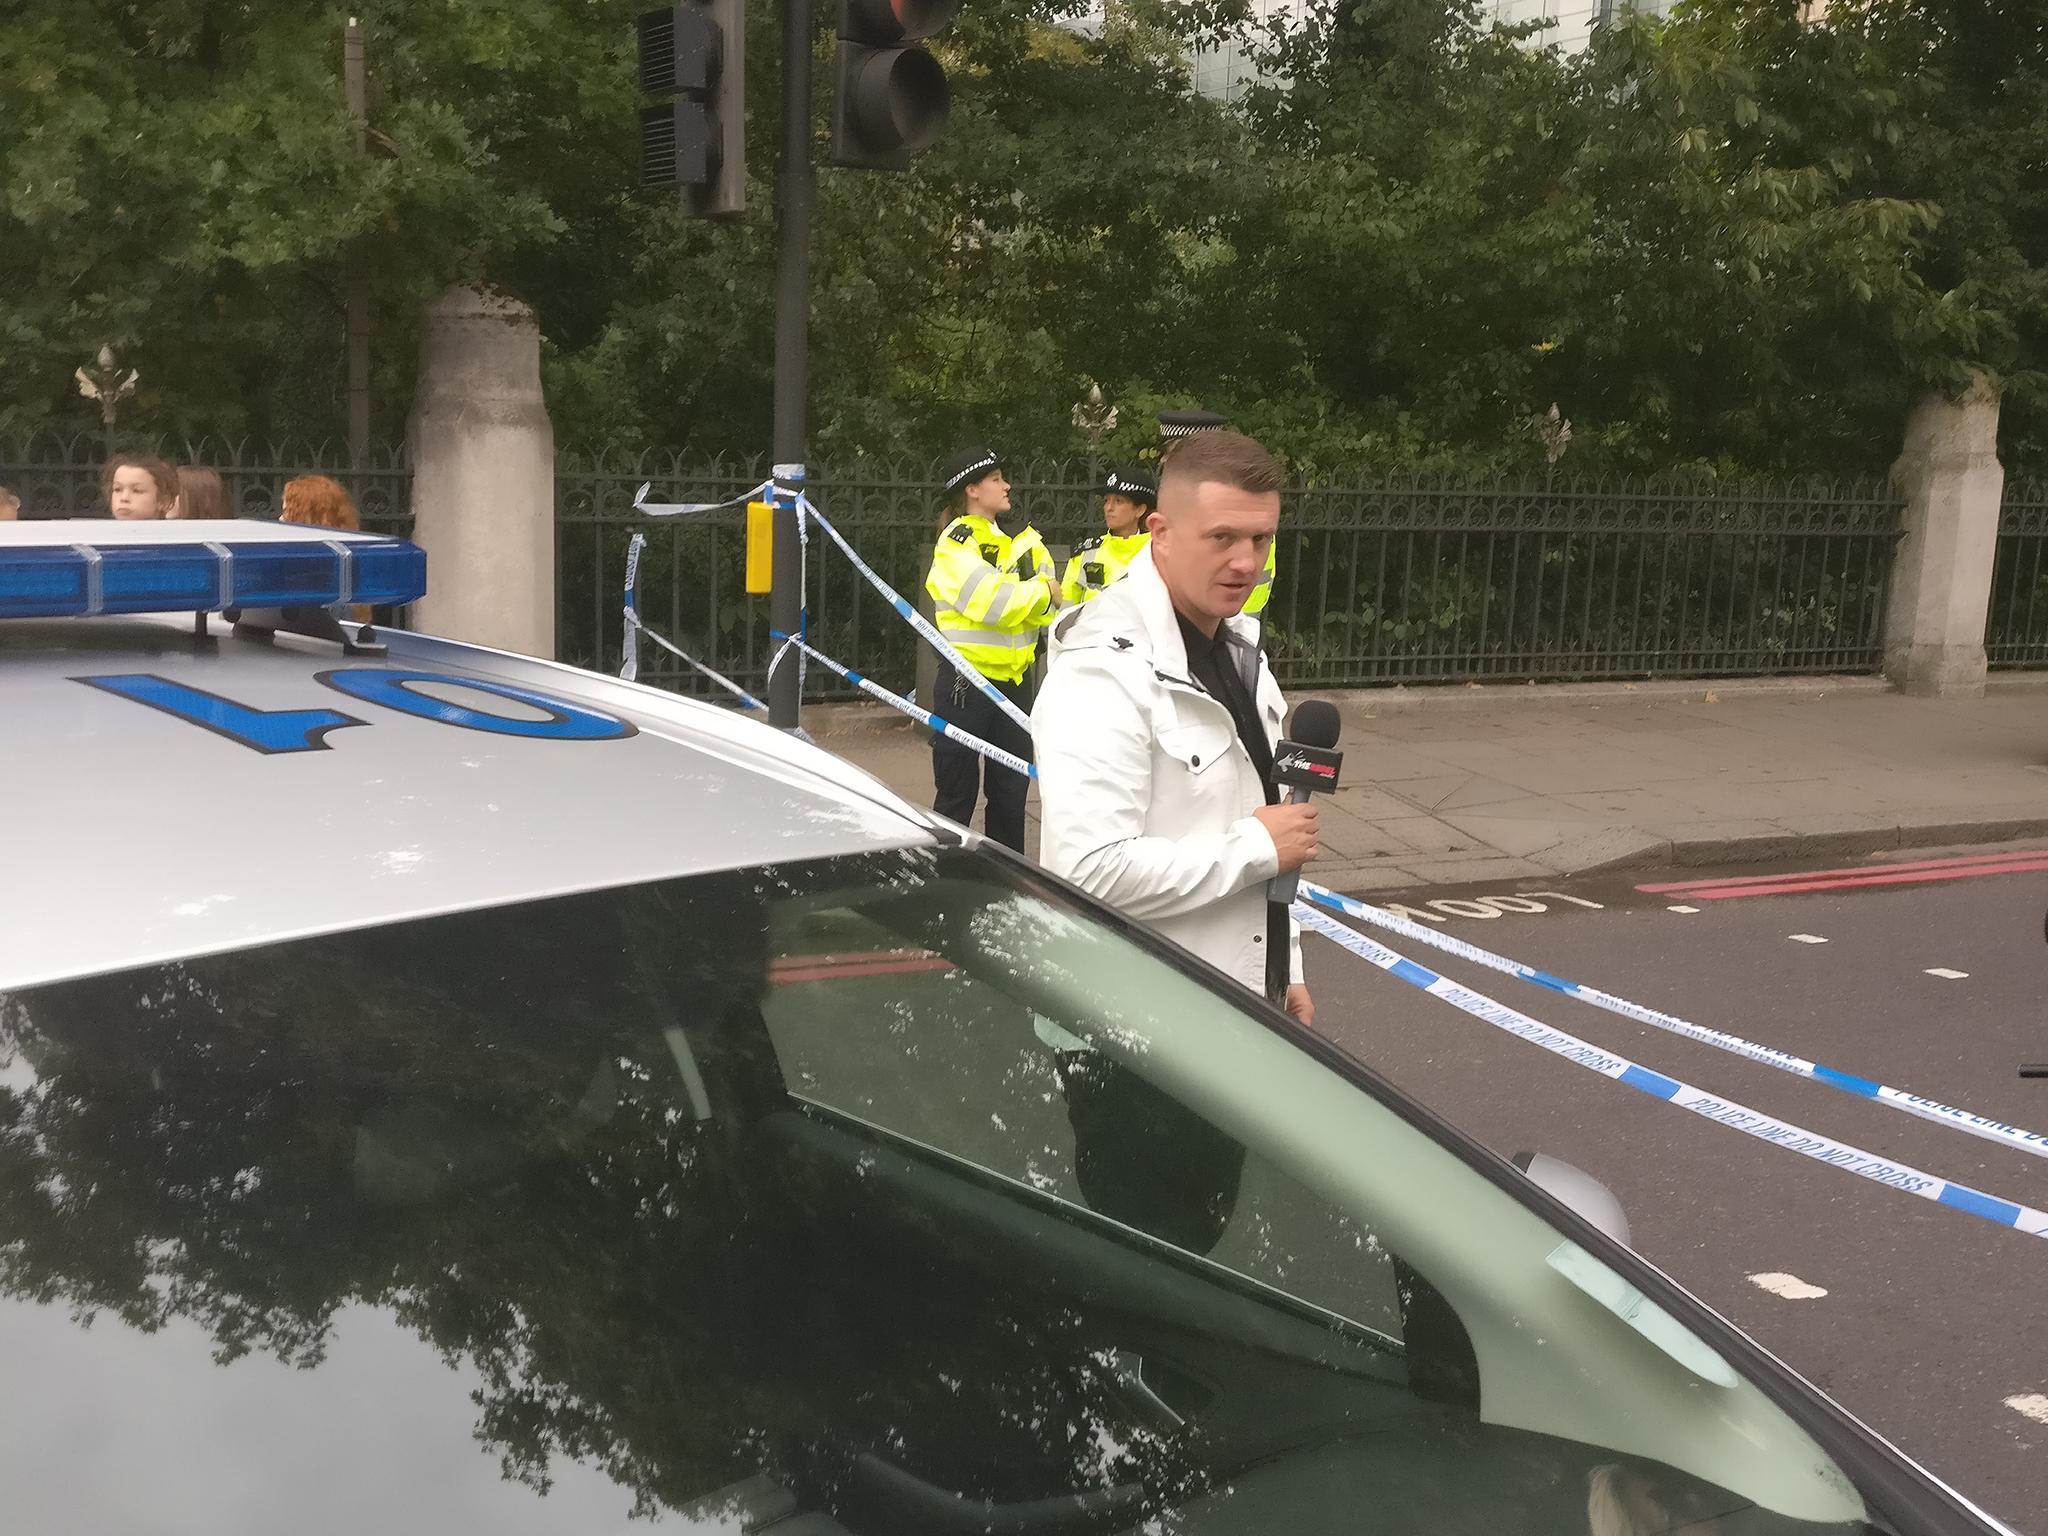 Stephen Yaxley-Lennon, also known as Tommy Robinson, at the scene of the collision outside the Natural History Museum in South Kensington (The Independent )